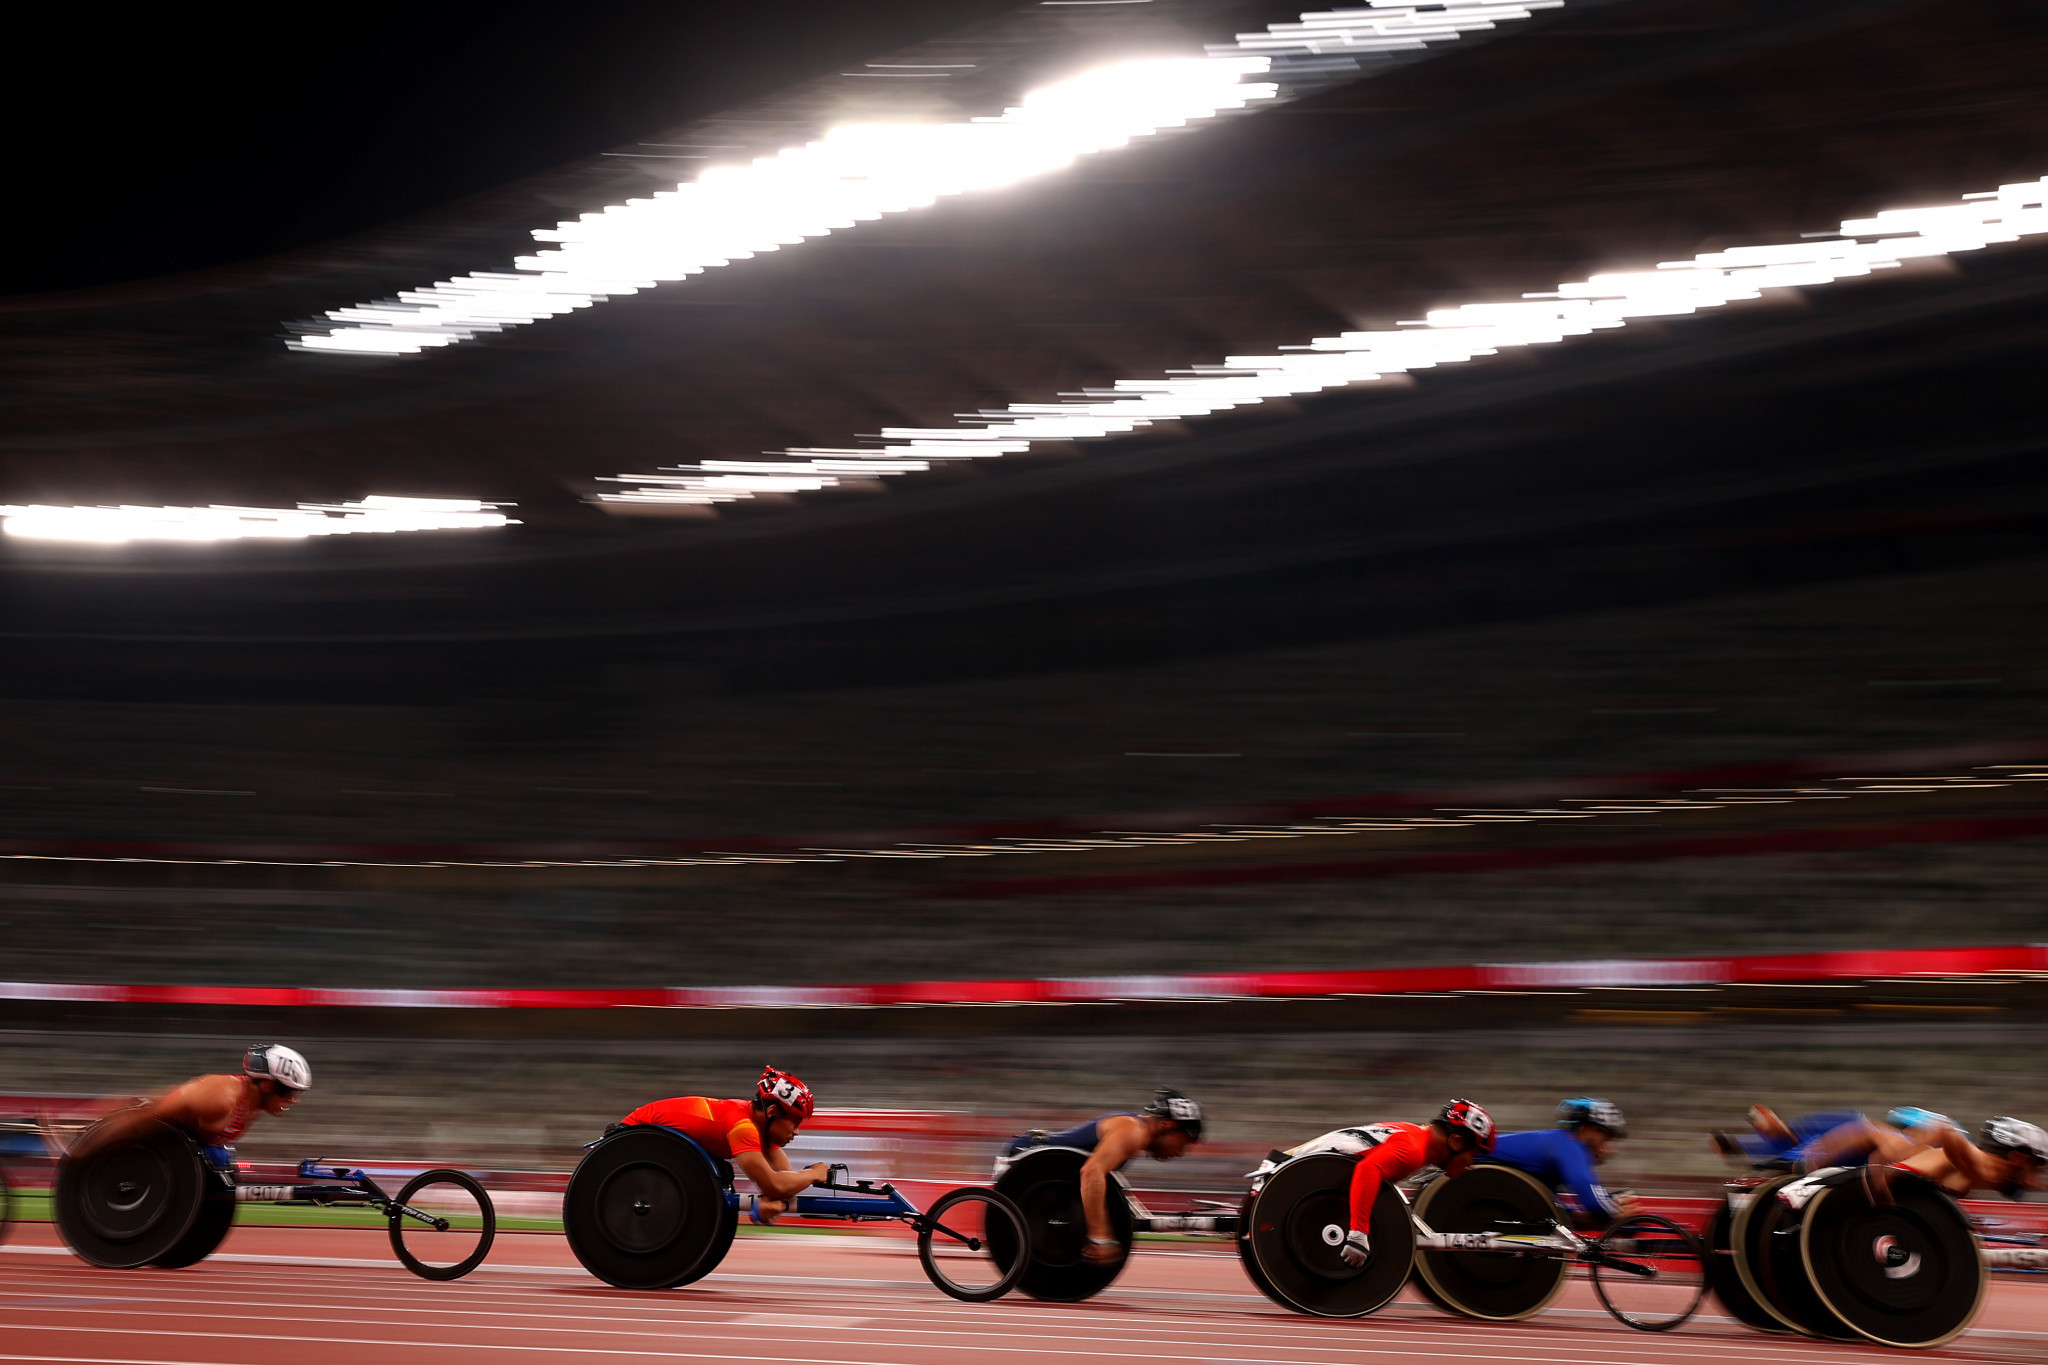 Wheelchair slalom to be demonstration event at IWAS World Games